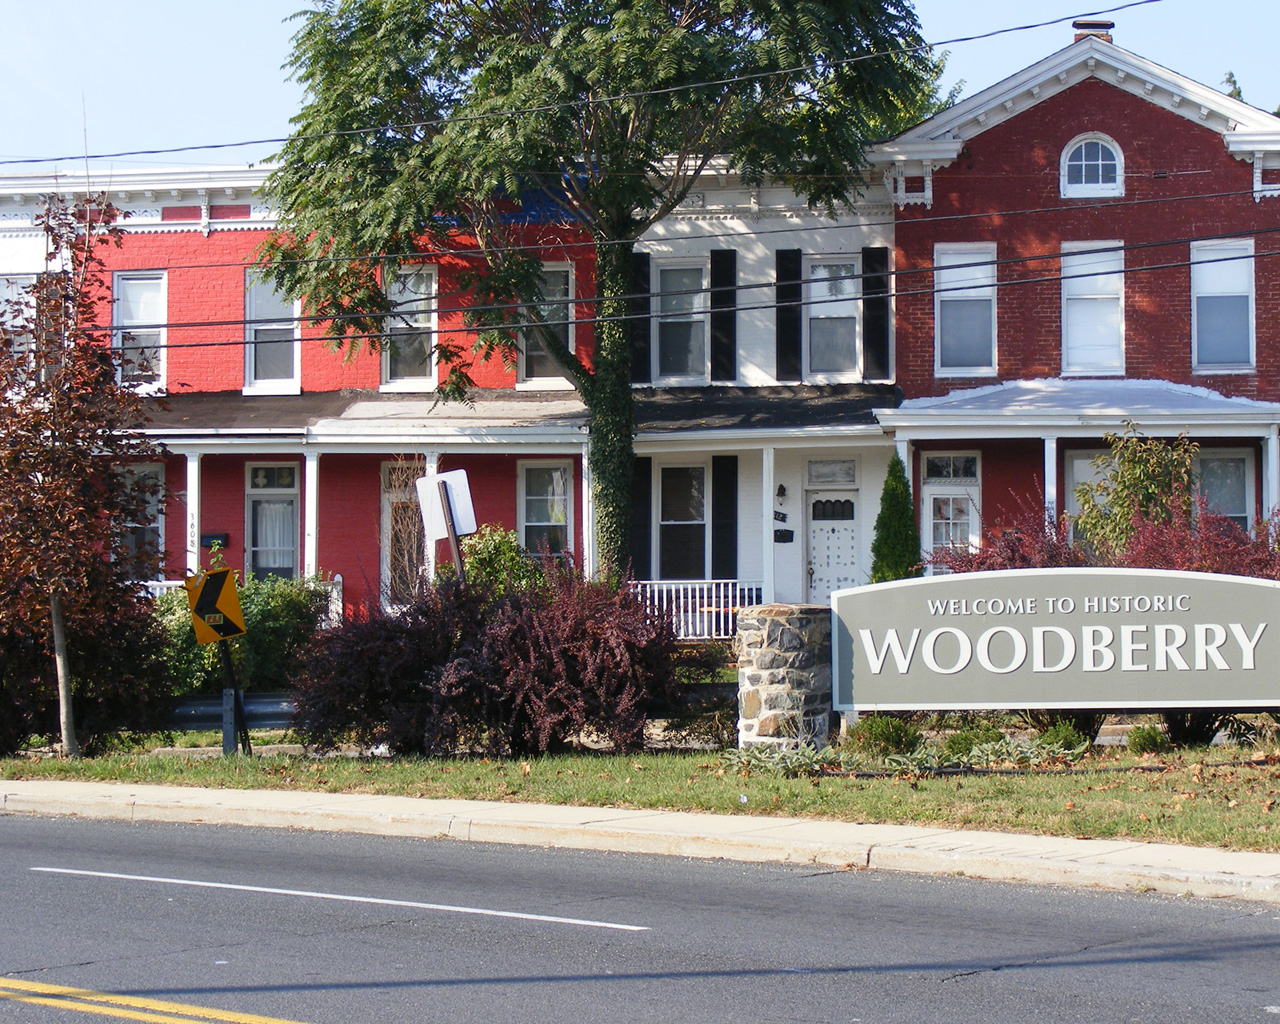 Woodberry In Baltimore Maryland City Wallpaper